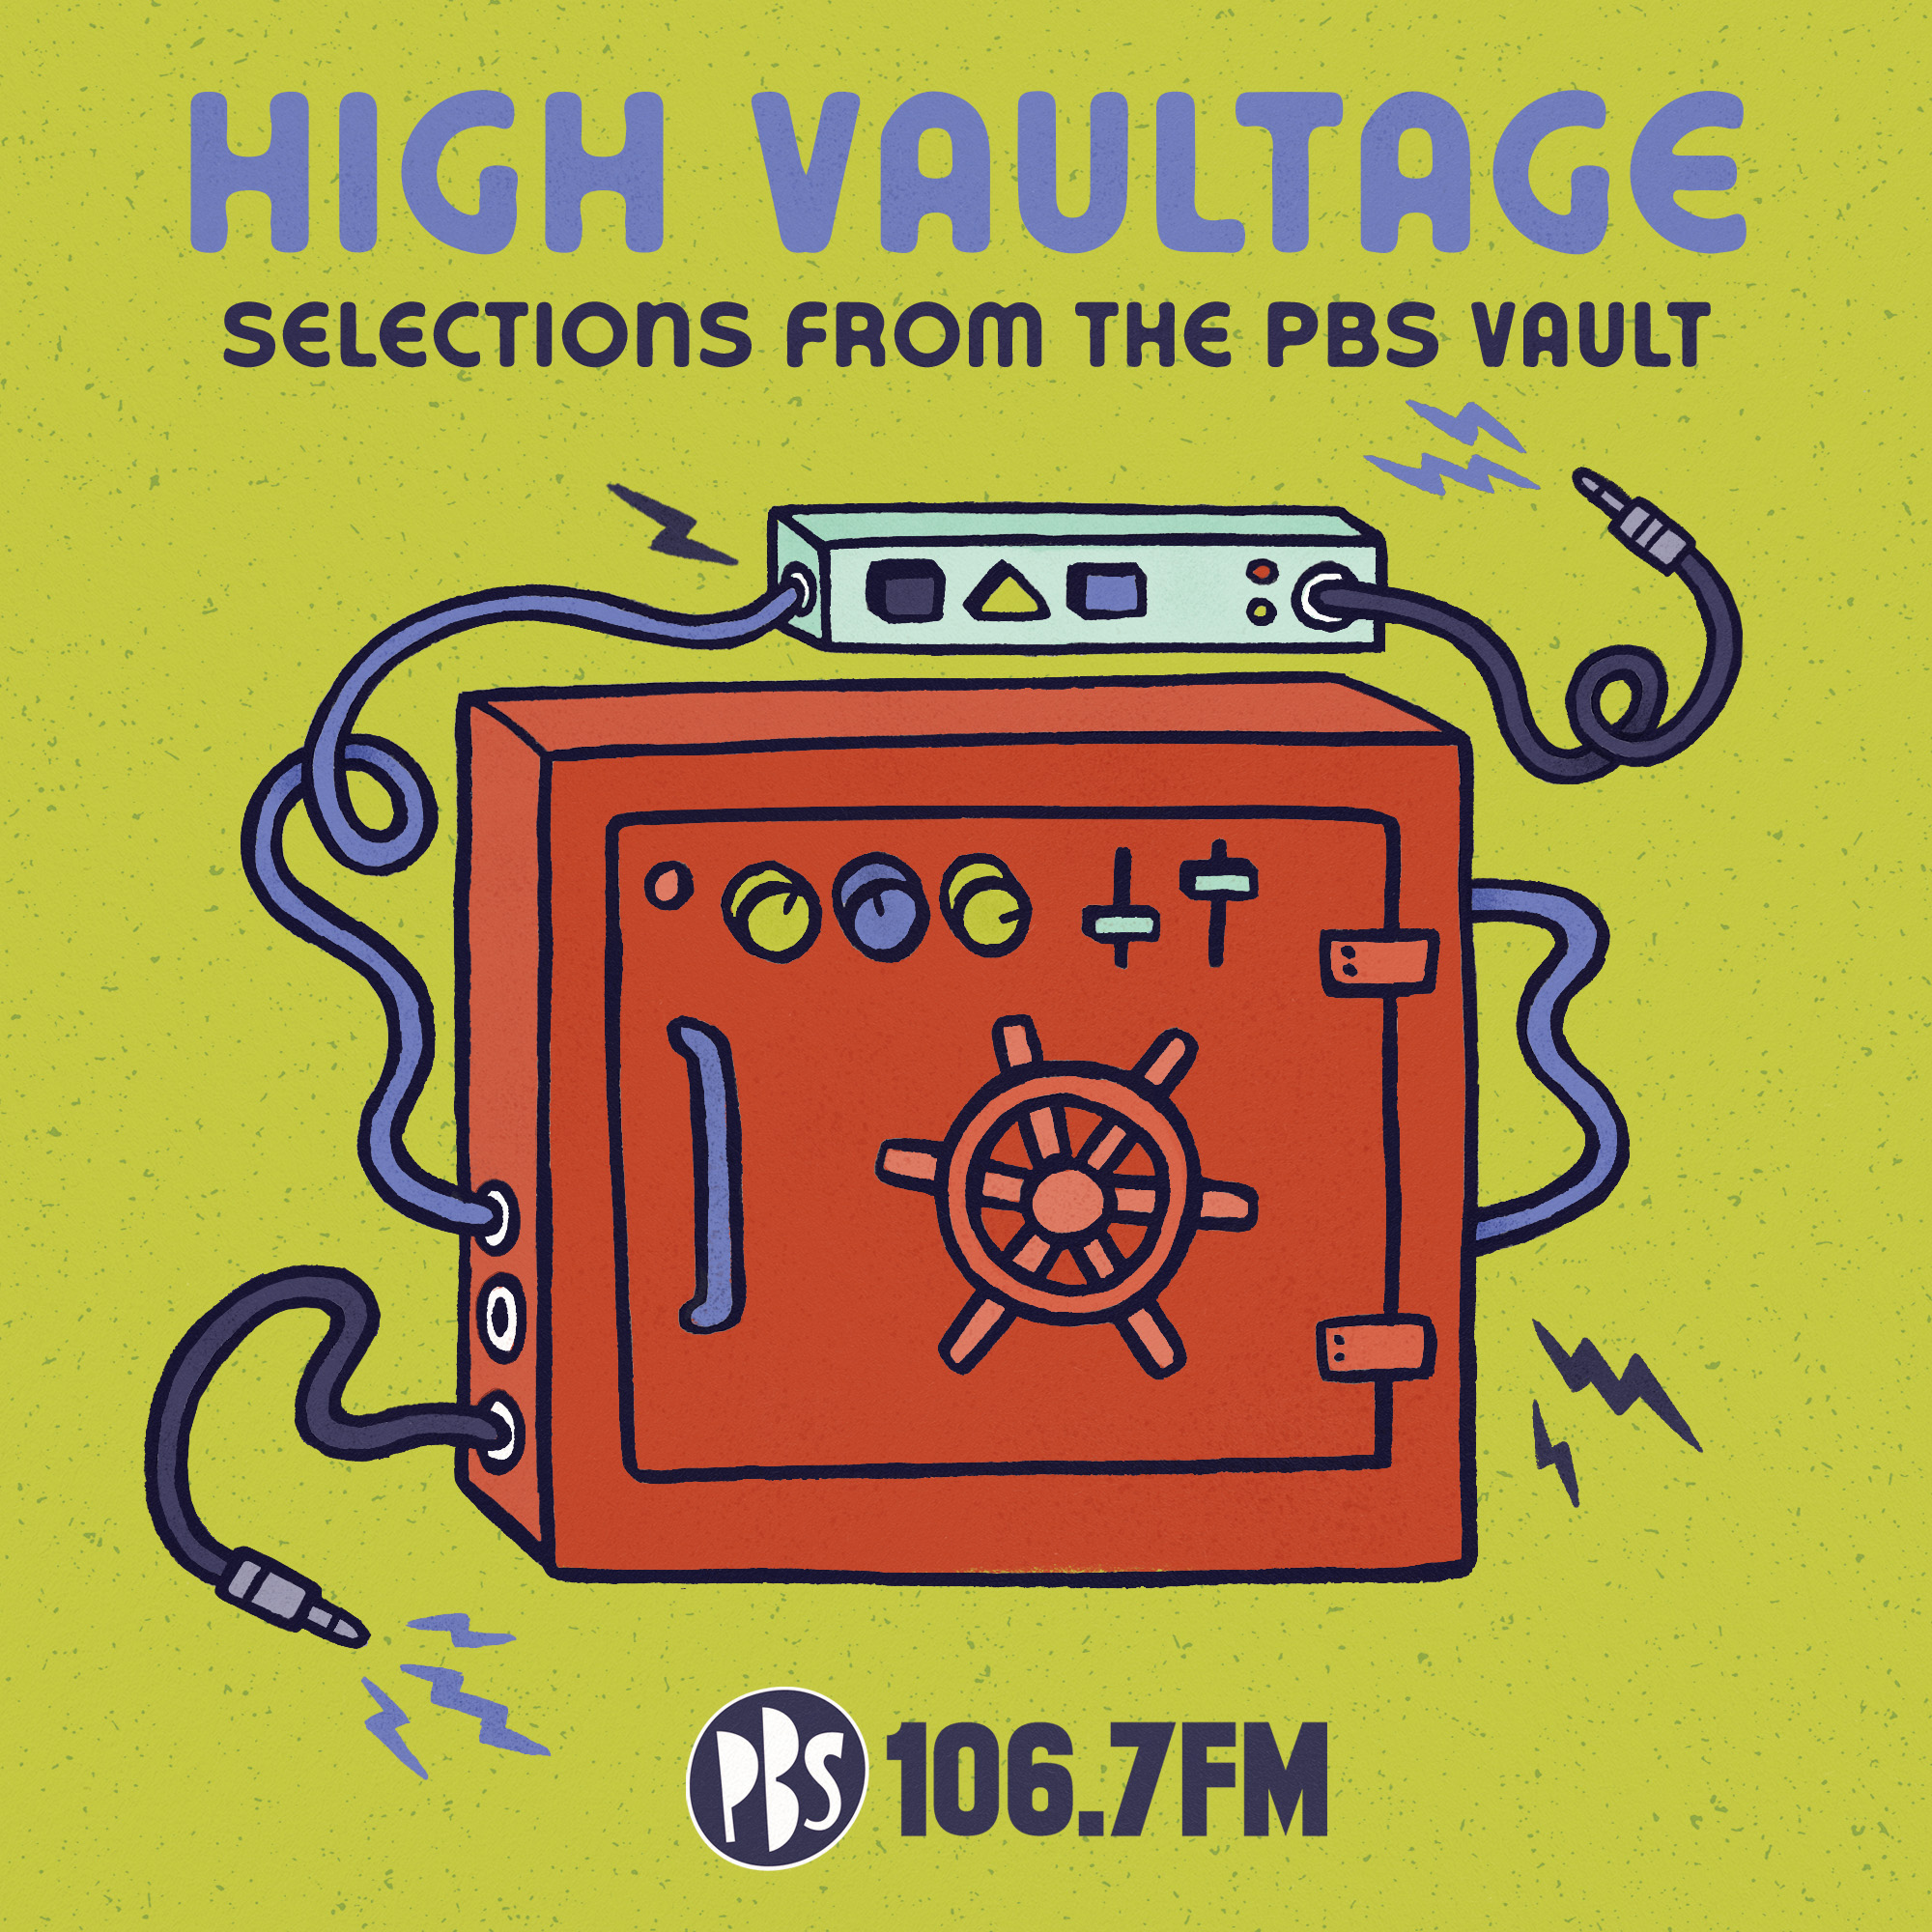 High Vaultage: selections from the PBS Vault